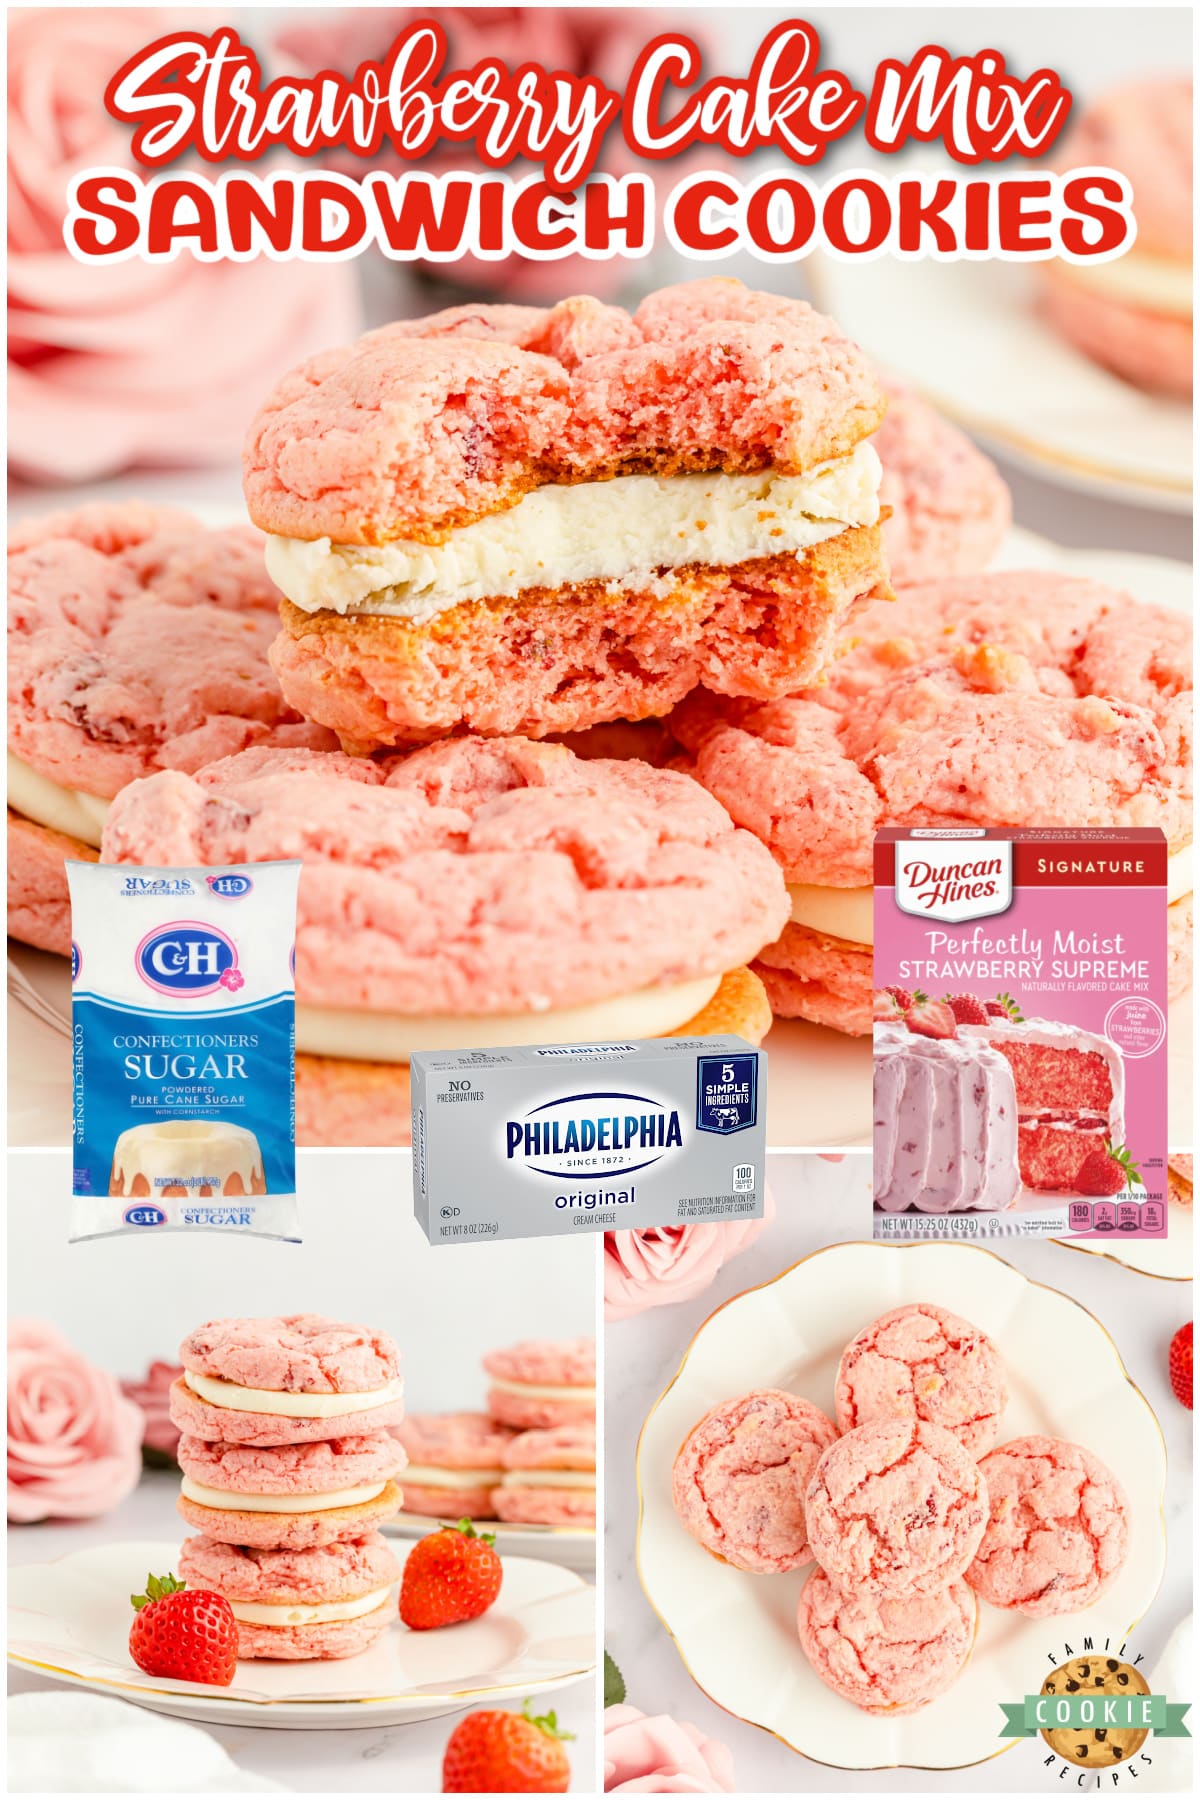 Strawberry Cake Mix Sandwich Cookies are made with freeze dried strawberries and a simple cream cheese filling. Easy cookie sandwiches that are packed with strawberry flavor!